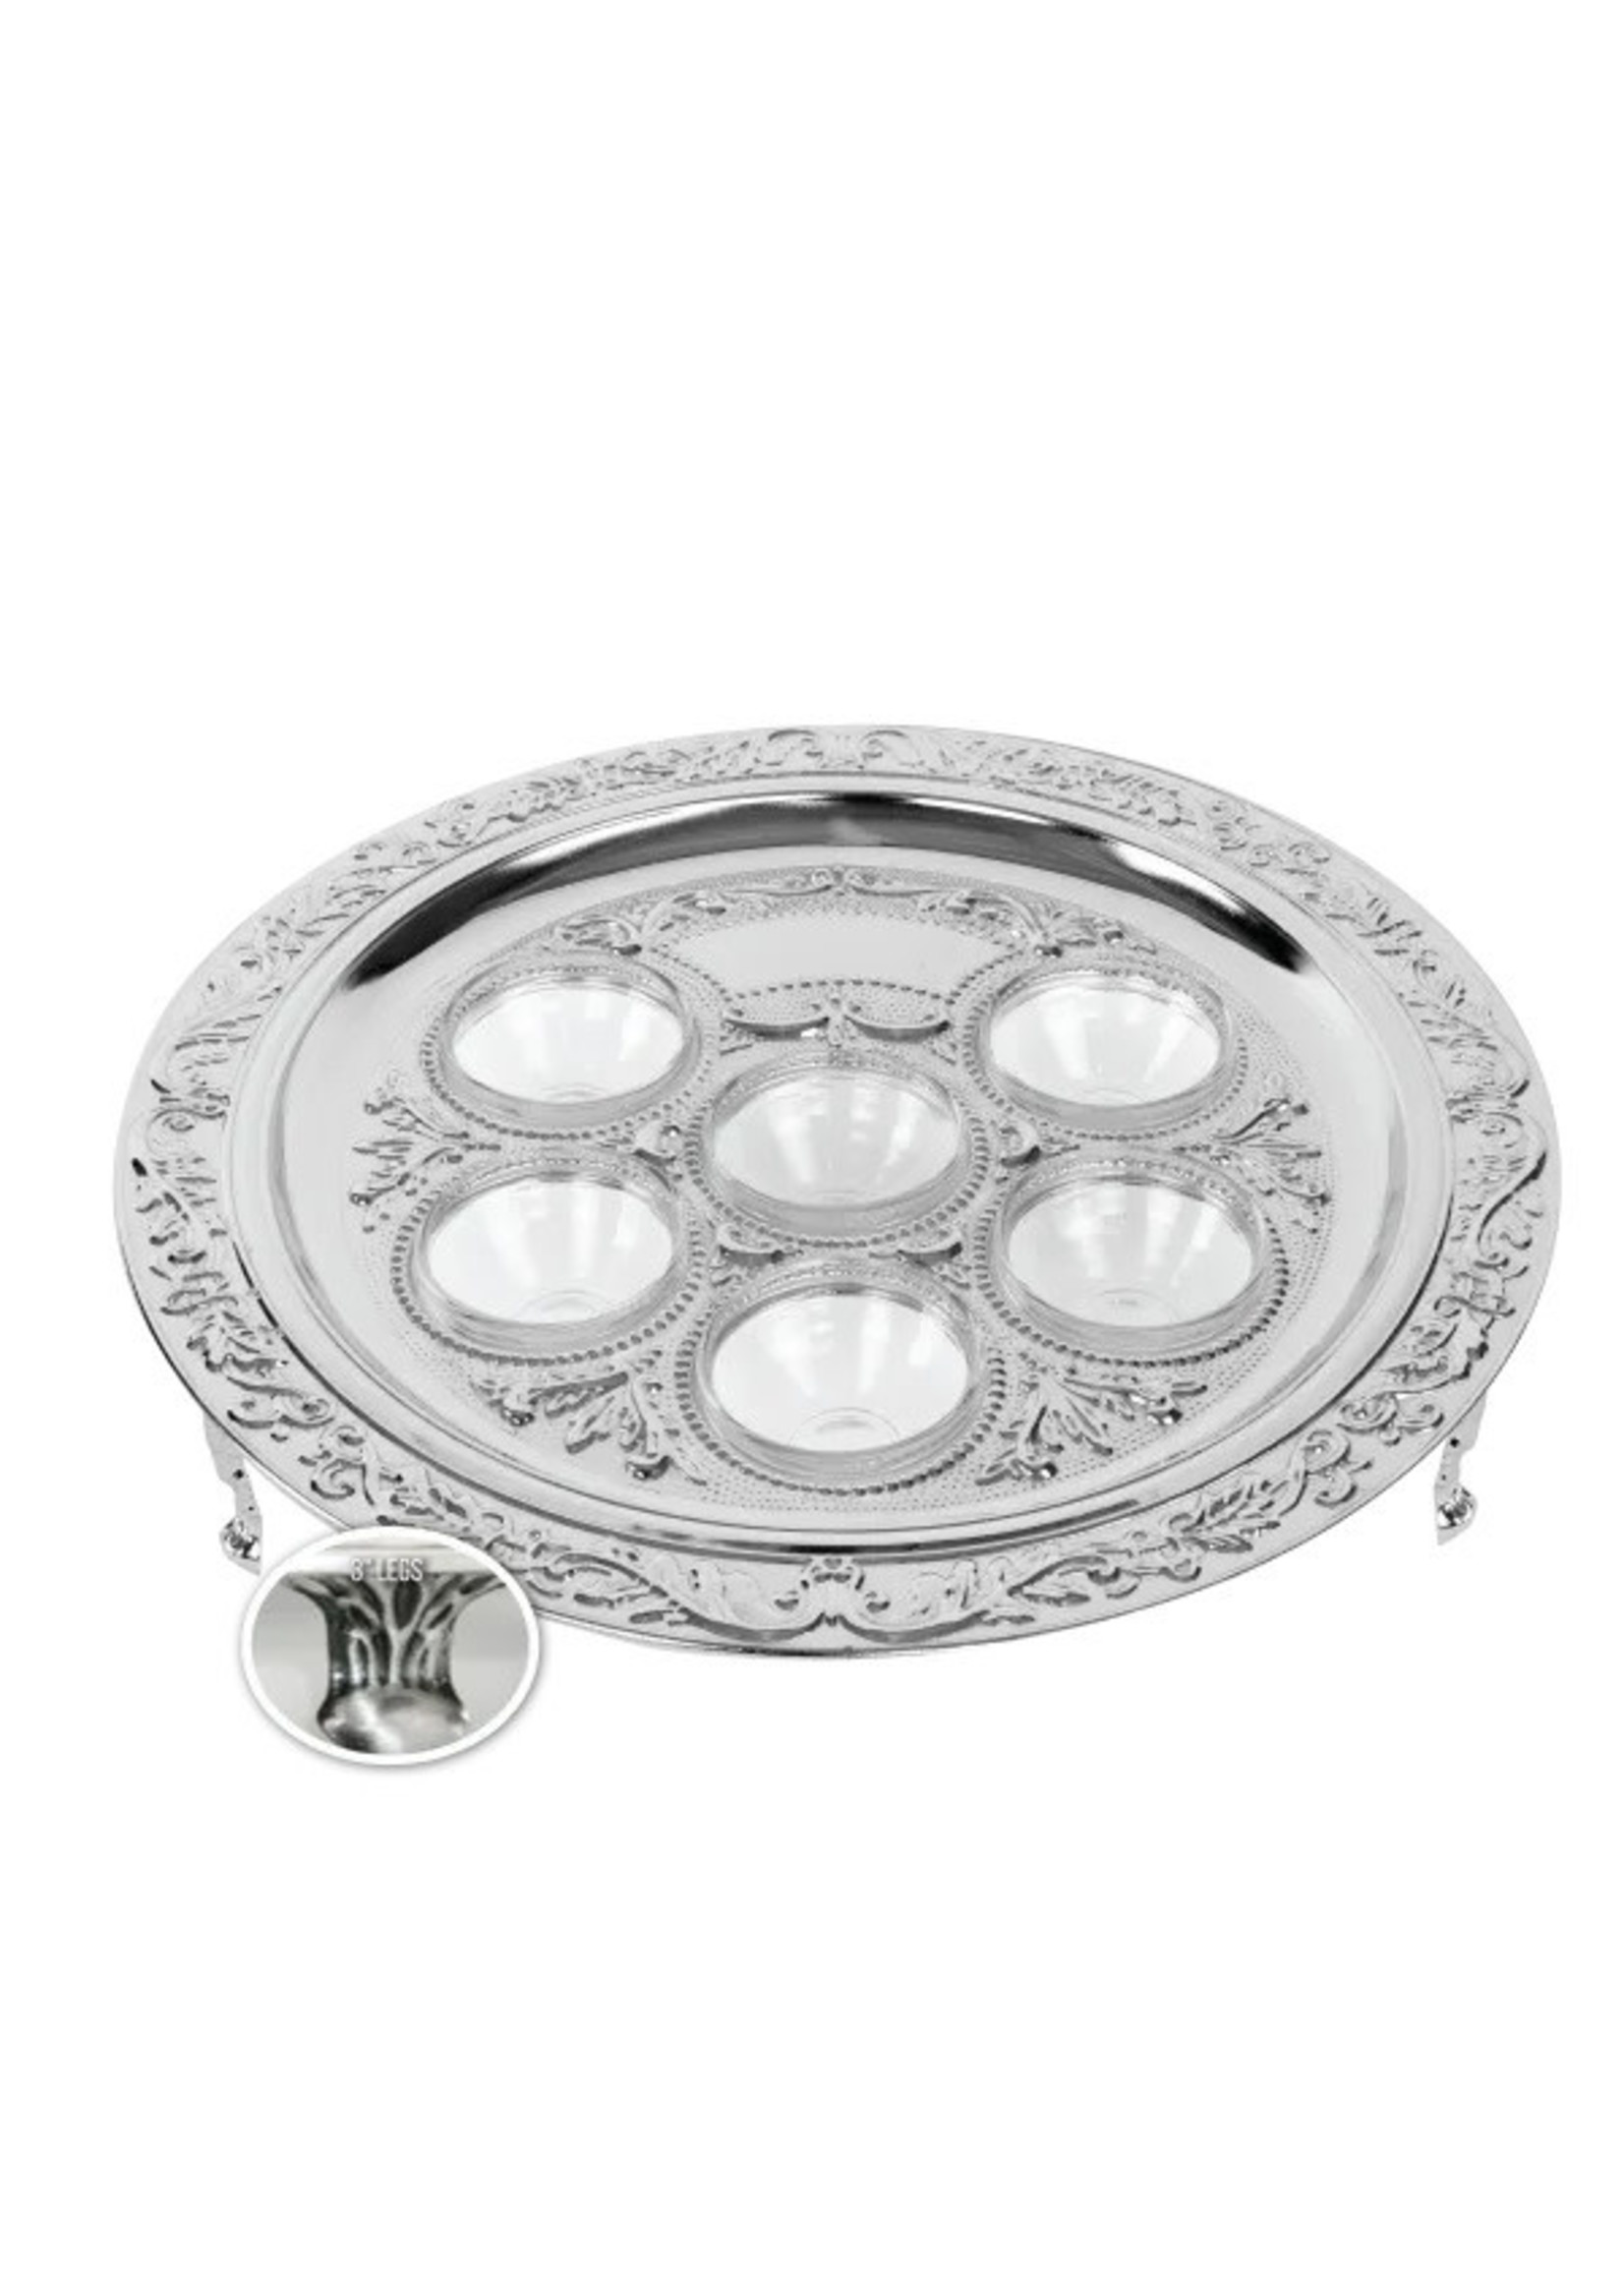 SEDER PLATE WITH GLASS BOWLS